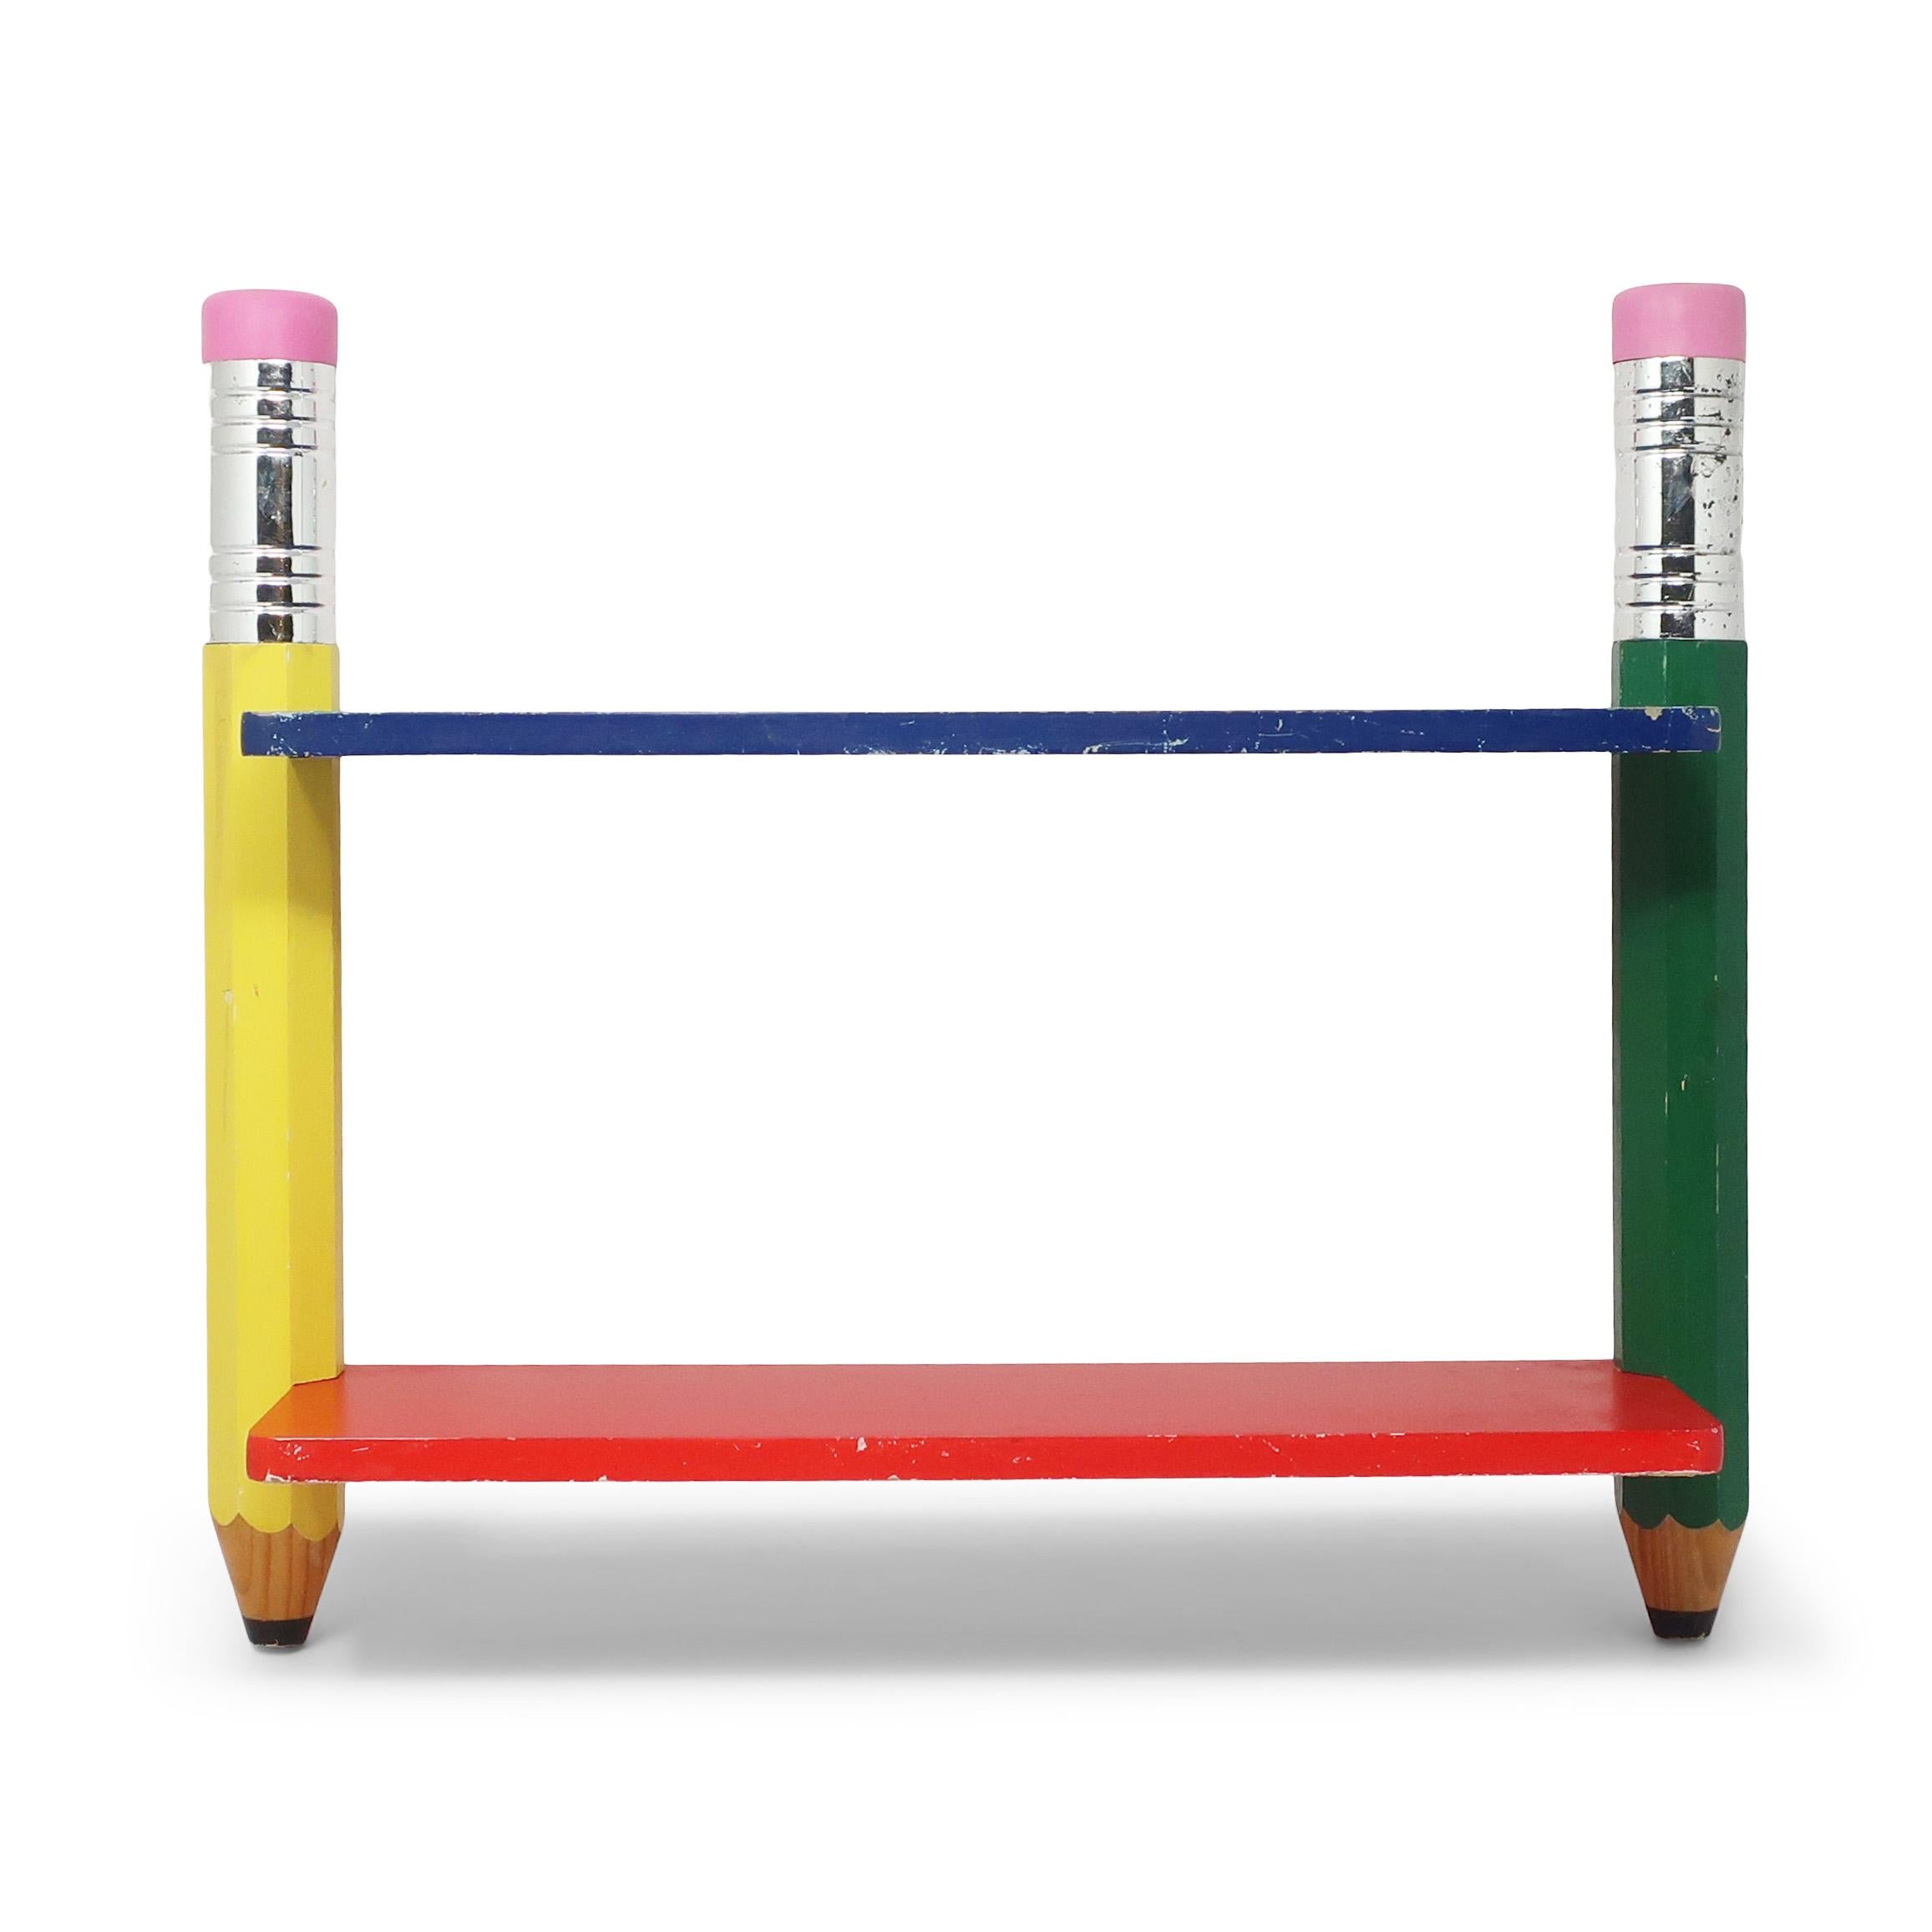 A great piece from Pierre Sala's postmodern pencil-themed children's furniture from the 1980s for Pierre Sala Furniture.  Design is composed of two shelves, one blue and red, supported by two pencils, one yellow and one green.  Includes rings on